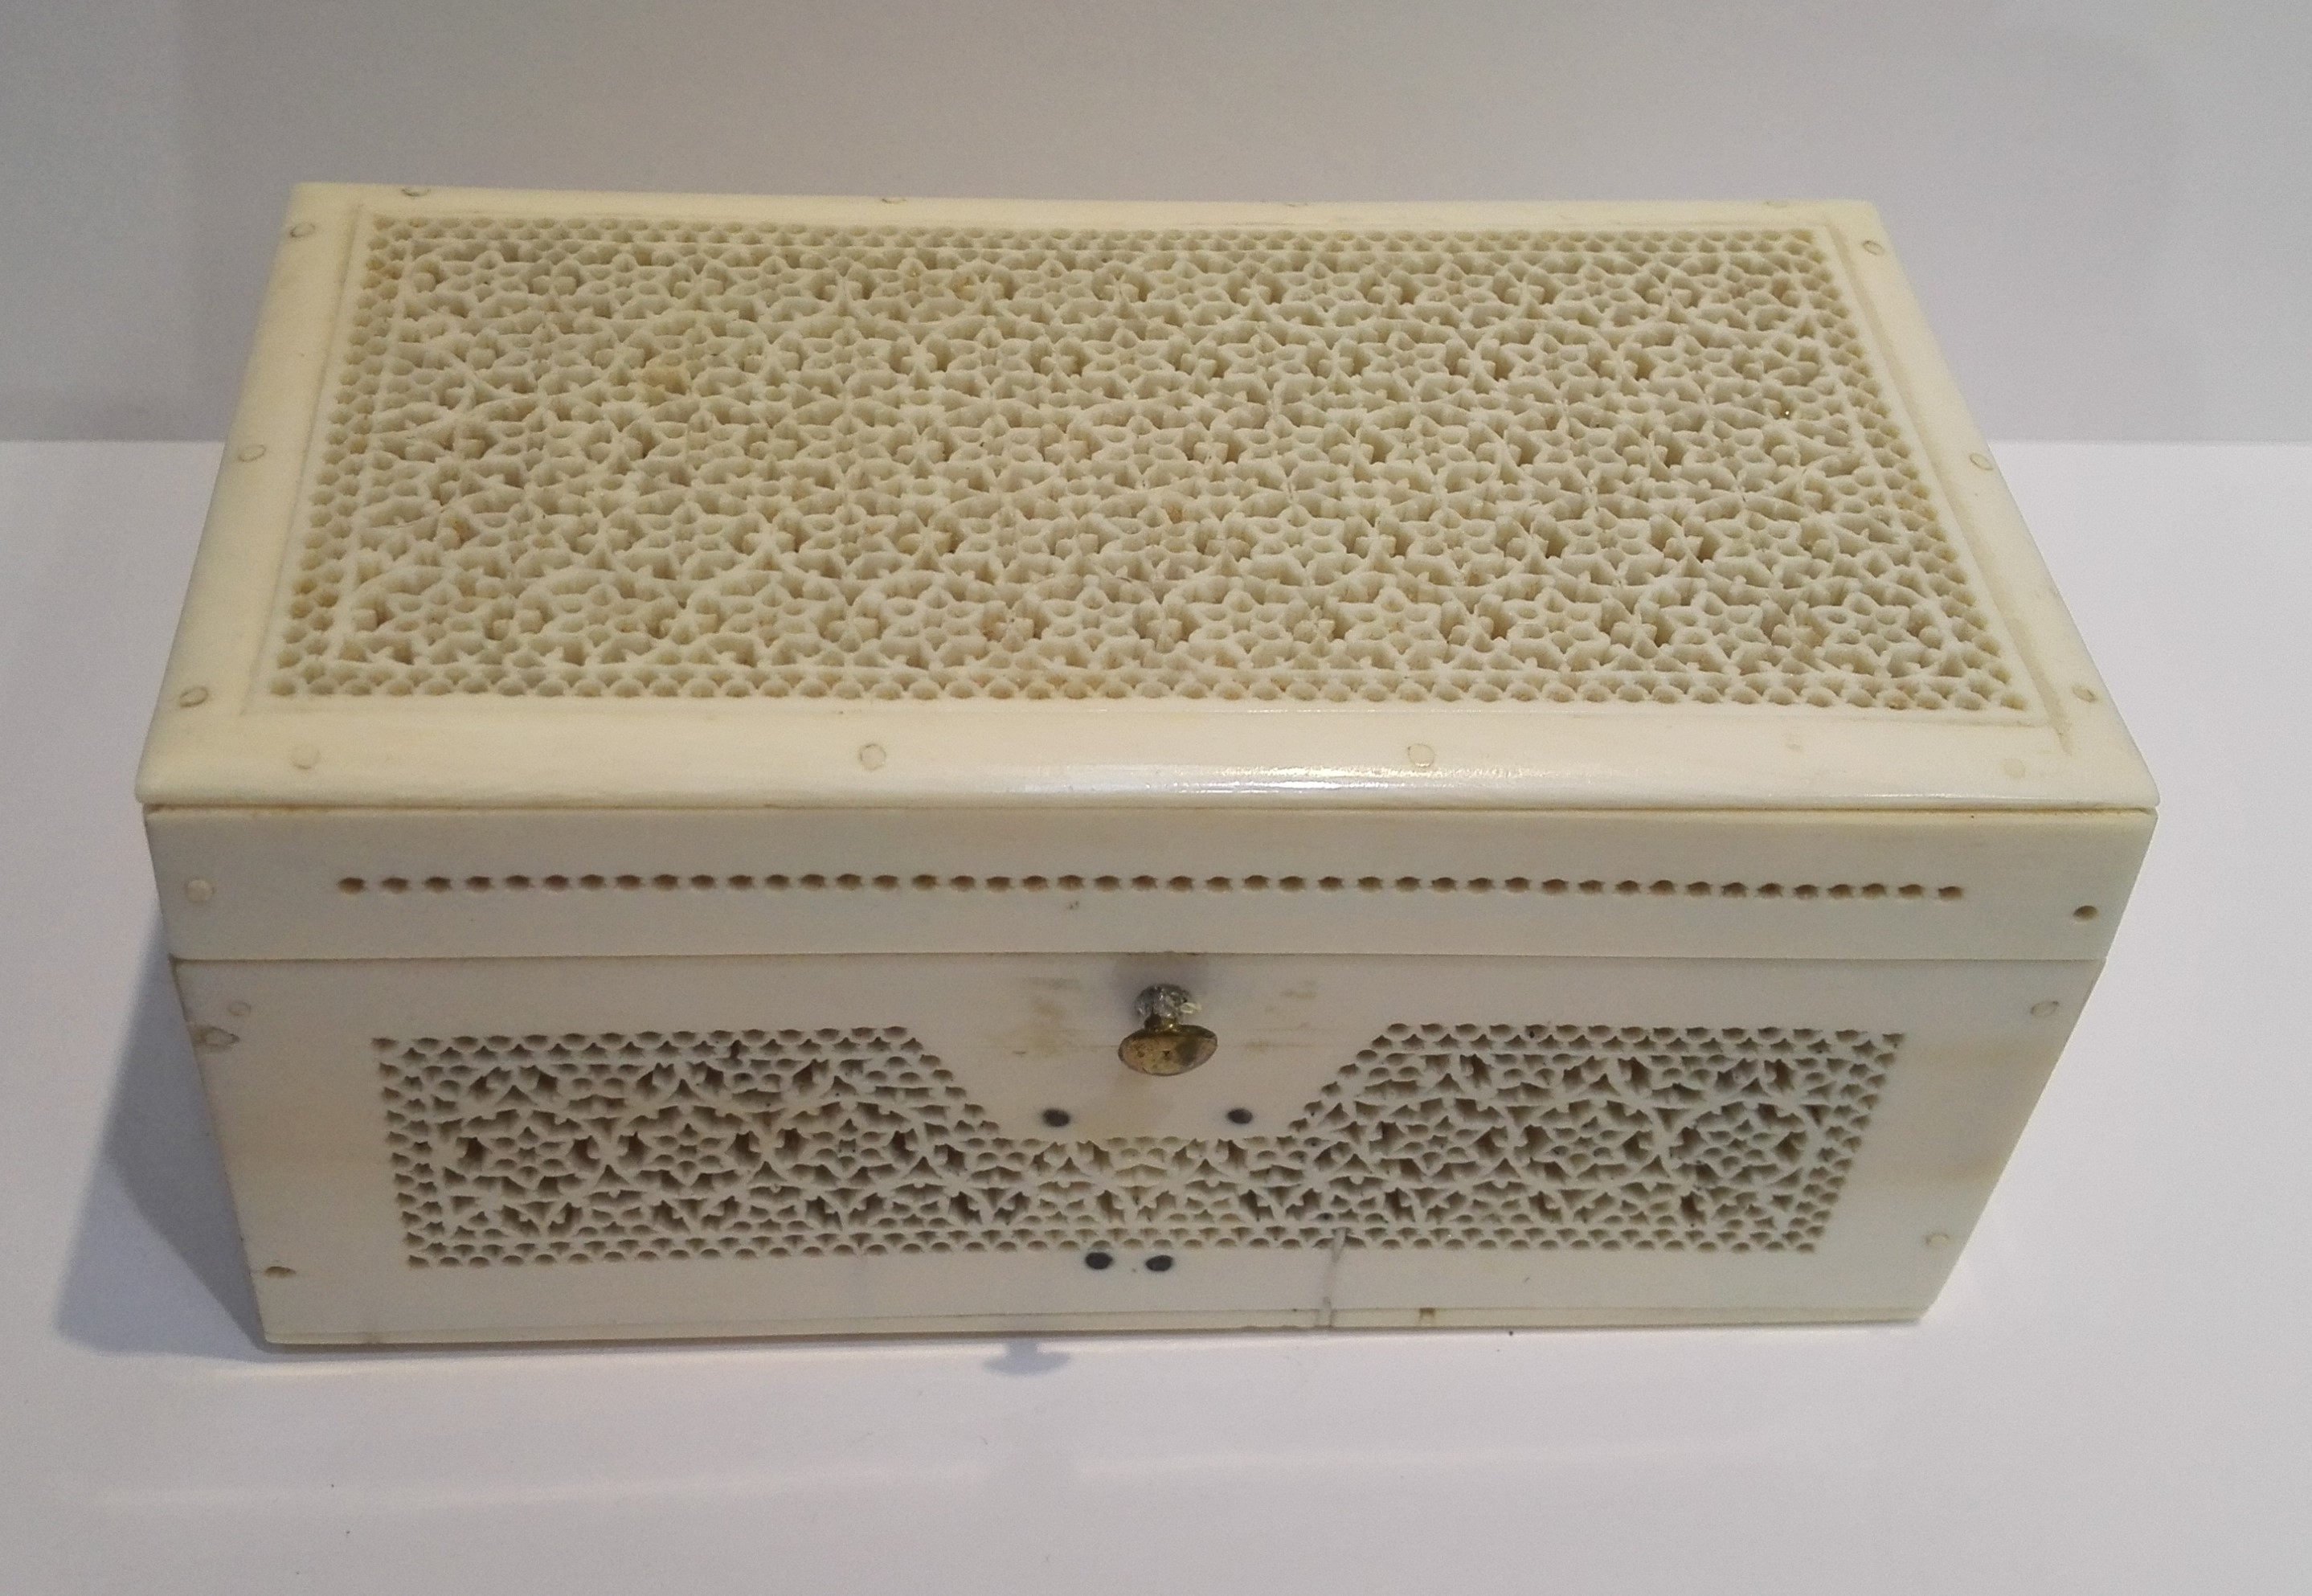 A C19th Indian ivory fine elaborate pierced casket/box with intricate openwork detailing, L11.5cm - Image 6 of 6